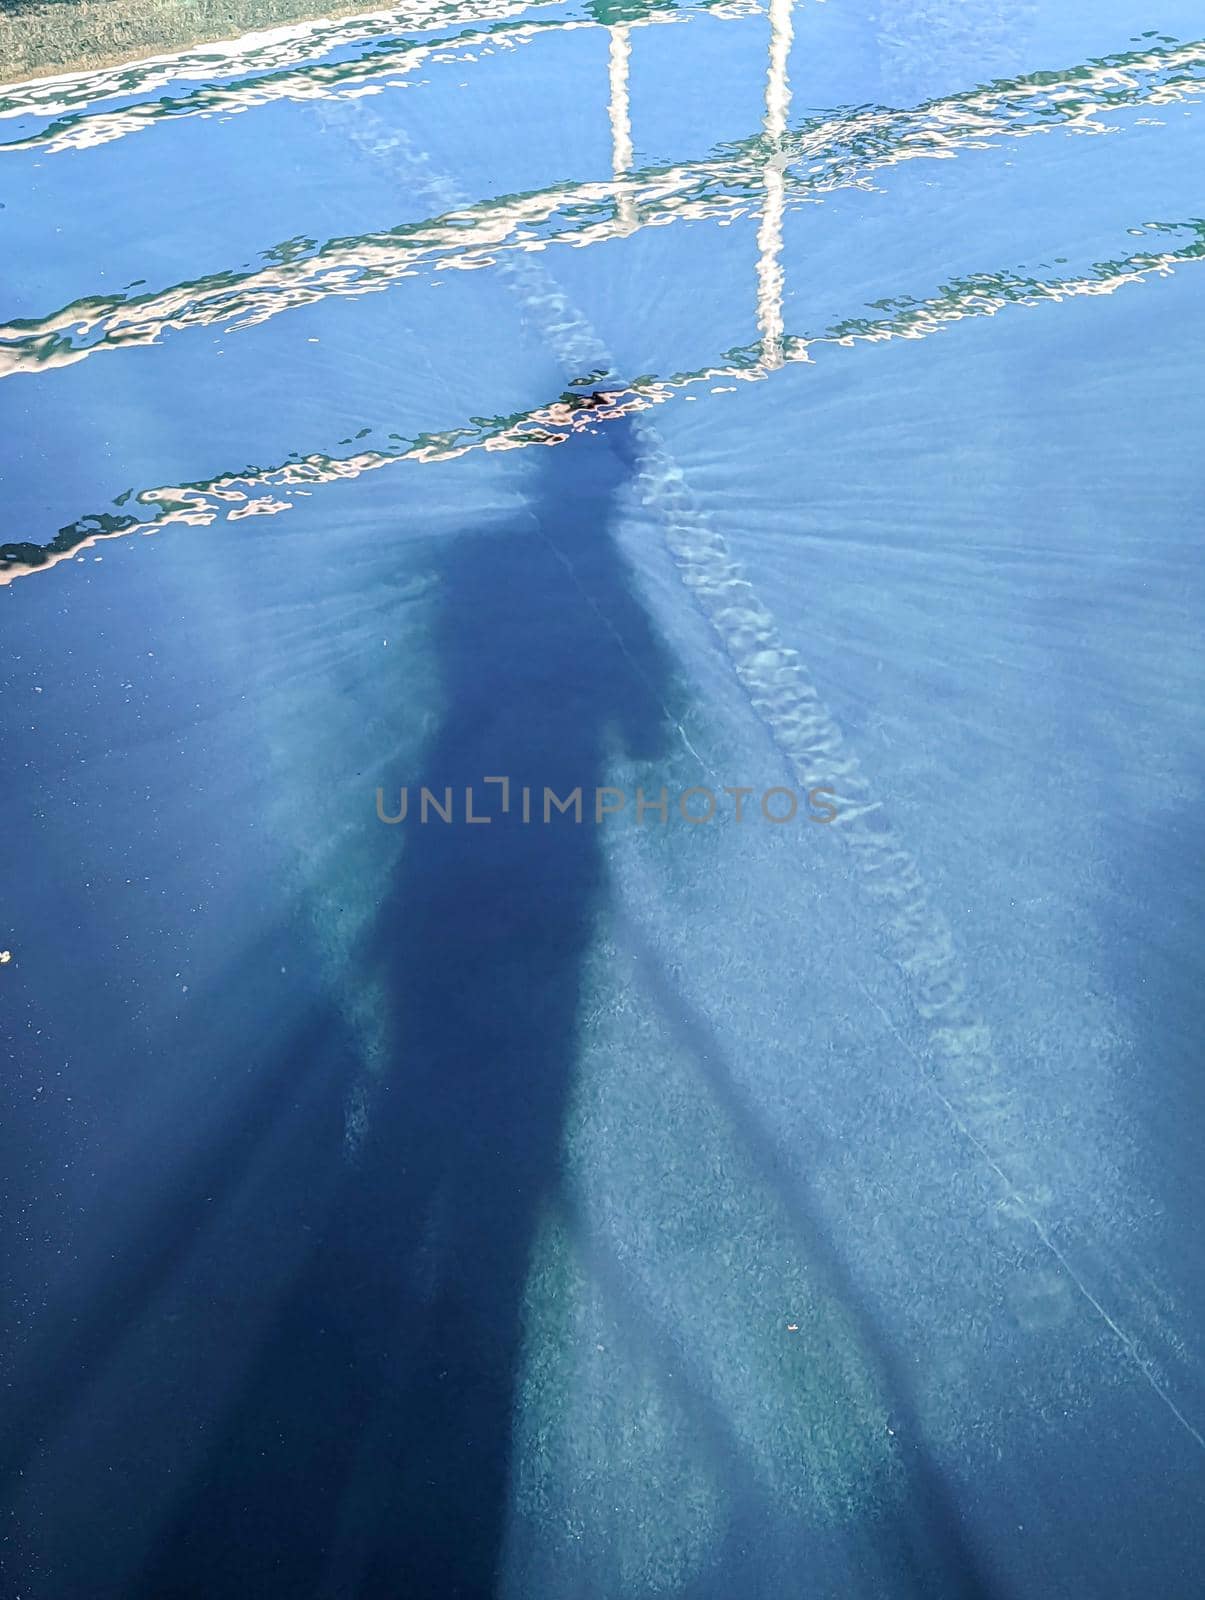 shadow of a person in pool of water